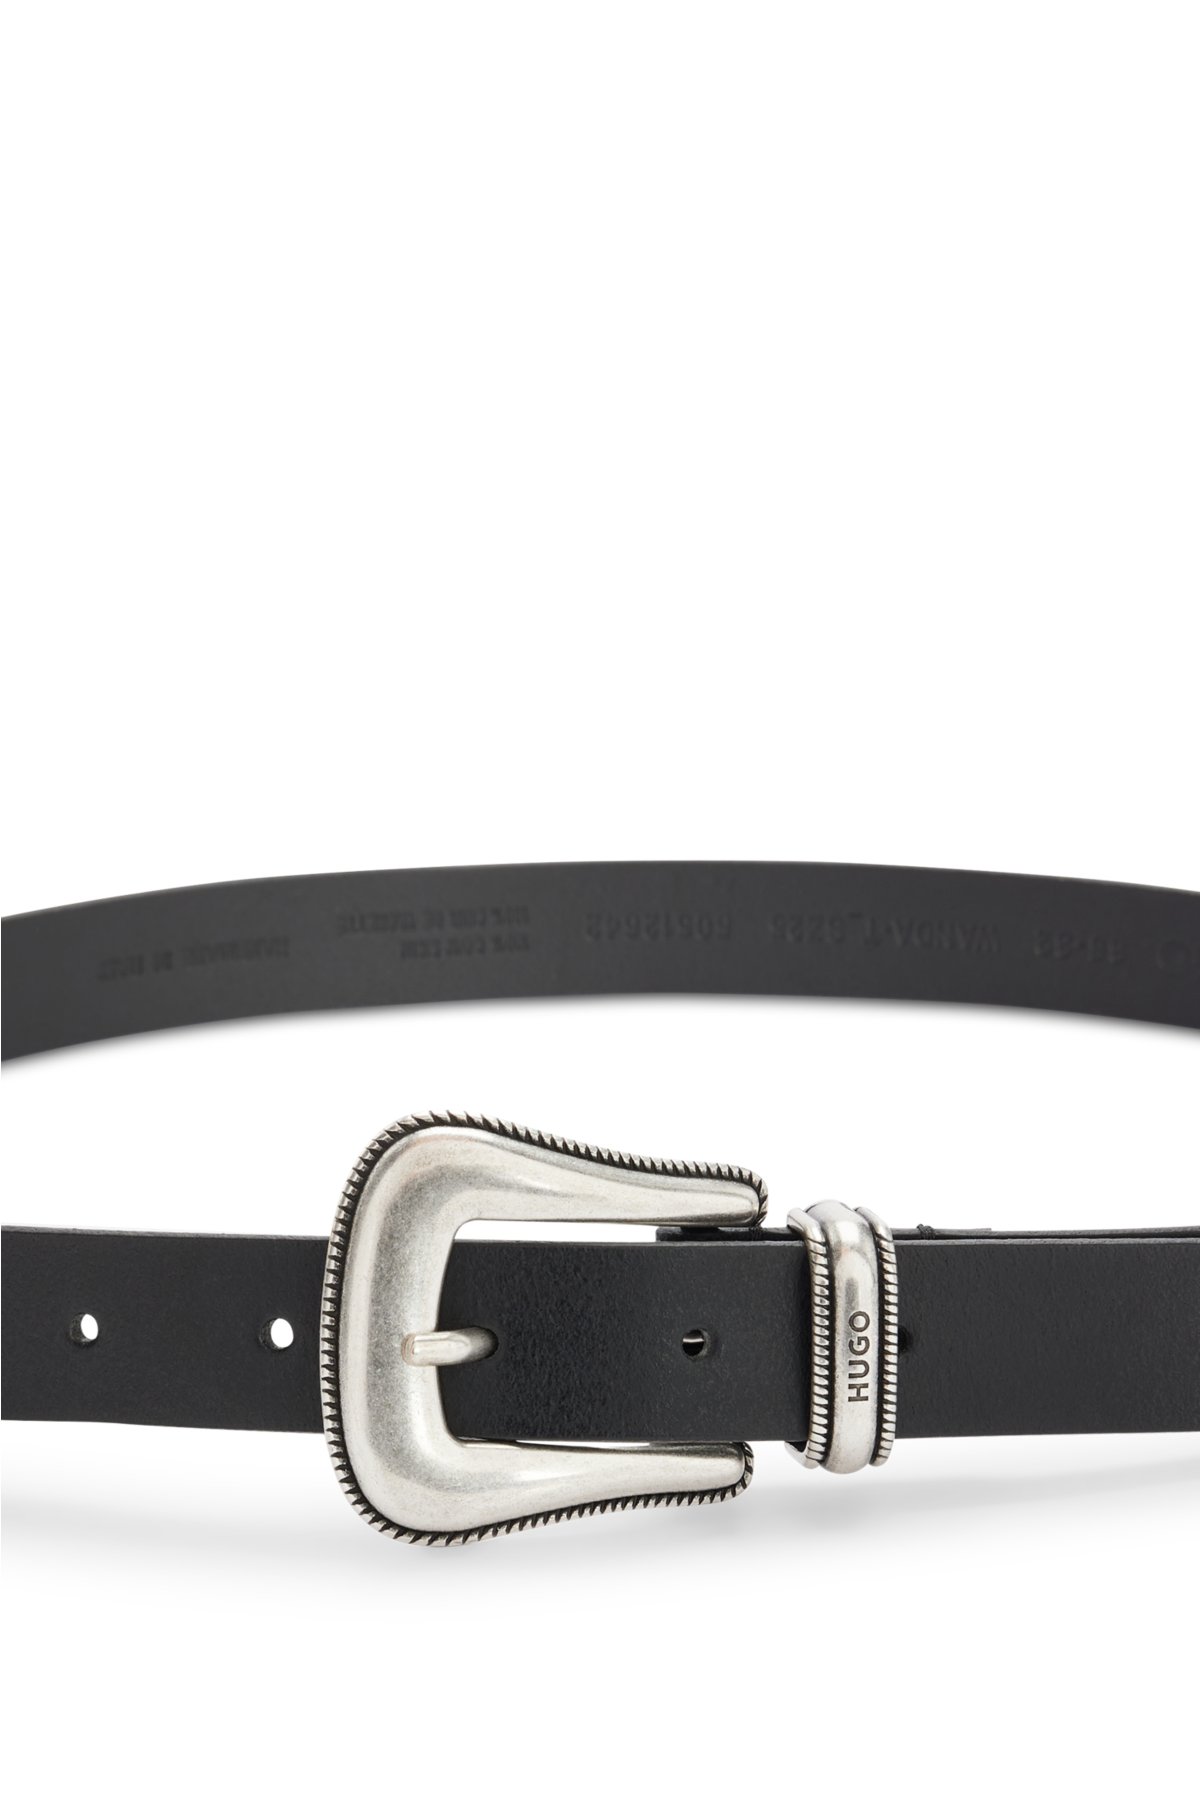 Italian-leather belt with branded keeper, Black